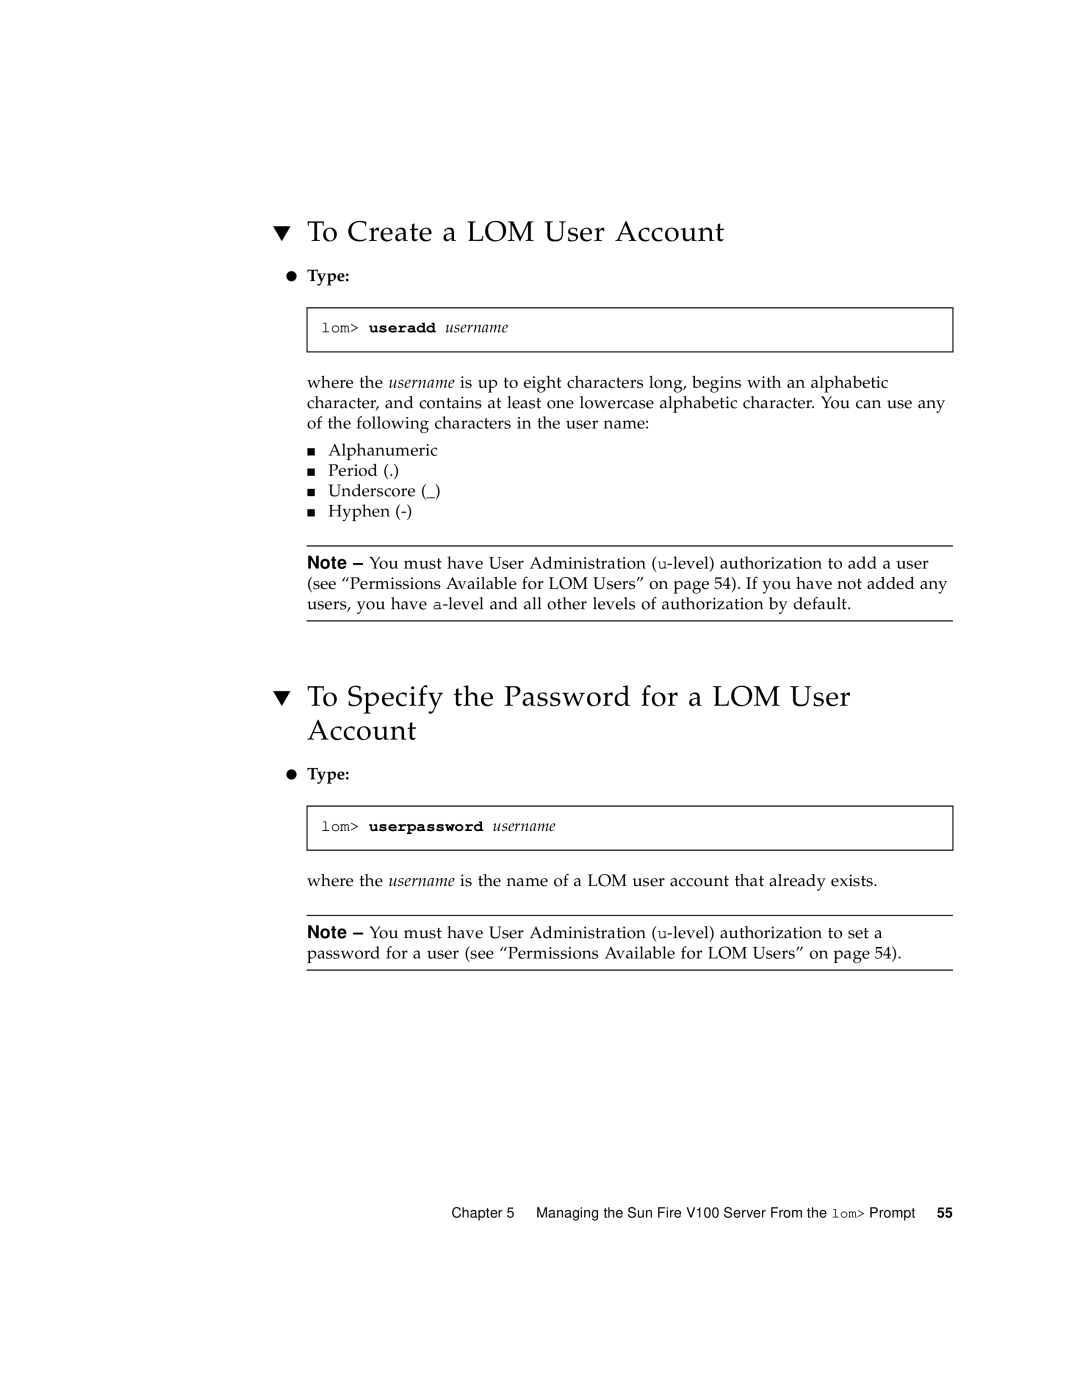 Sun Microsystems Sun Fire V100 manual To Create a LOM User Account, To Specify the Password for a LOM User Account, Type 